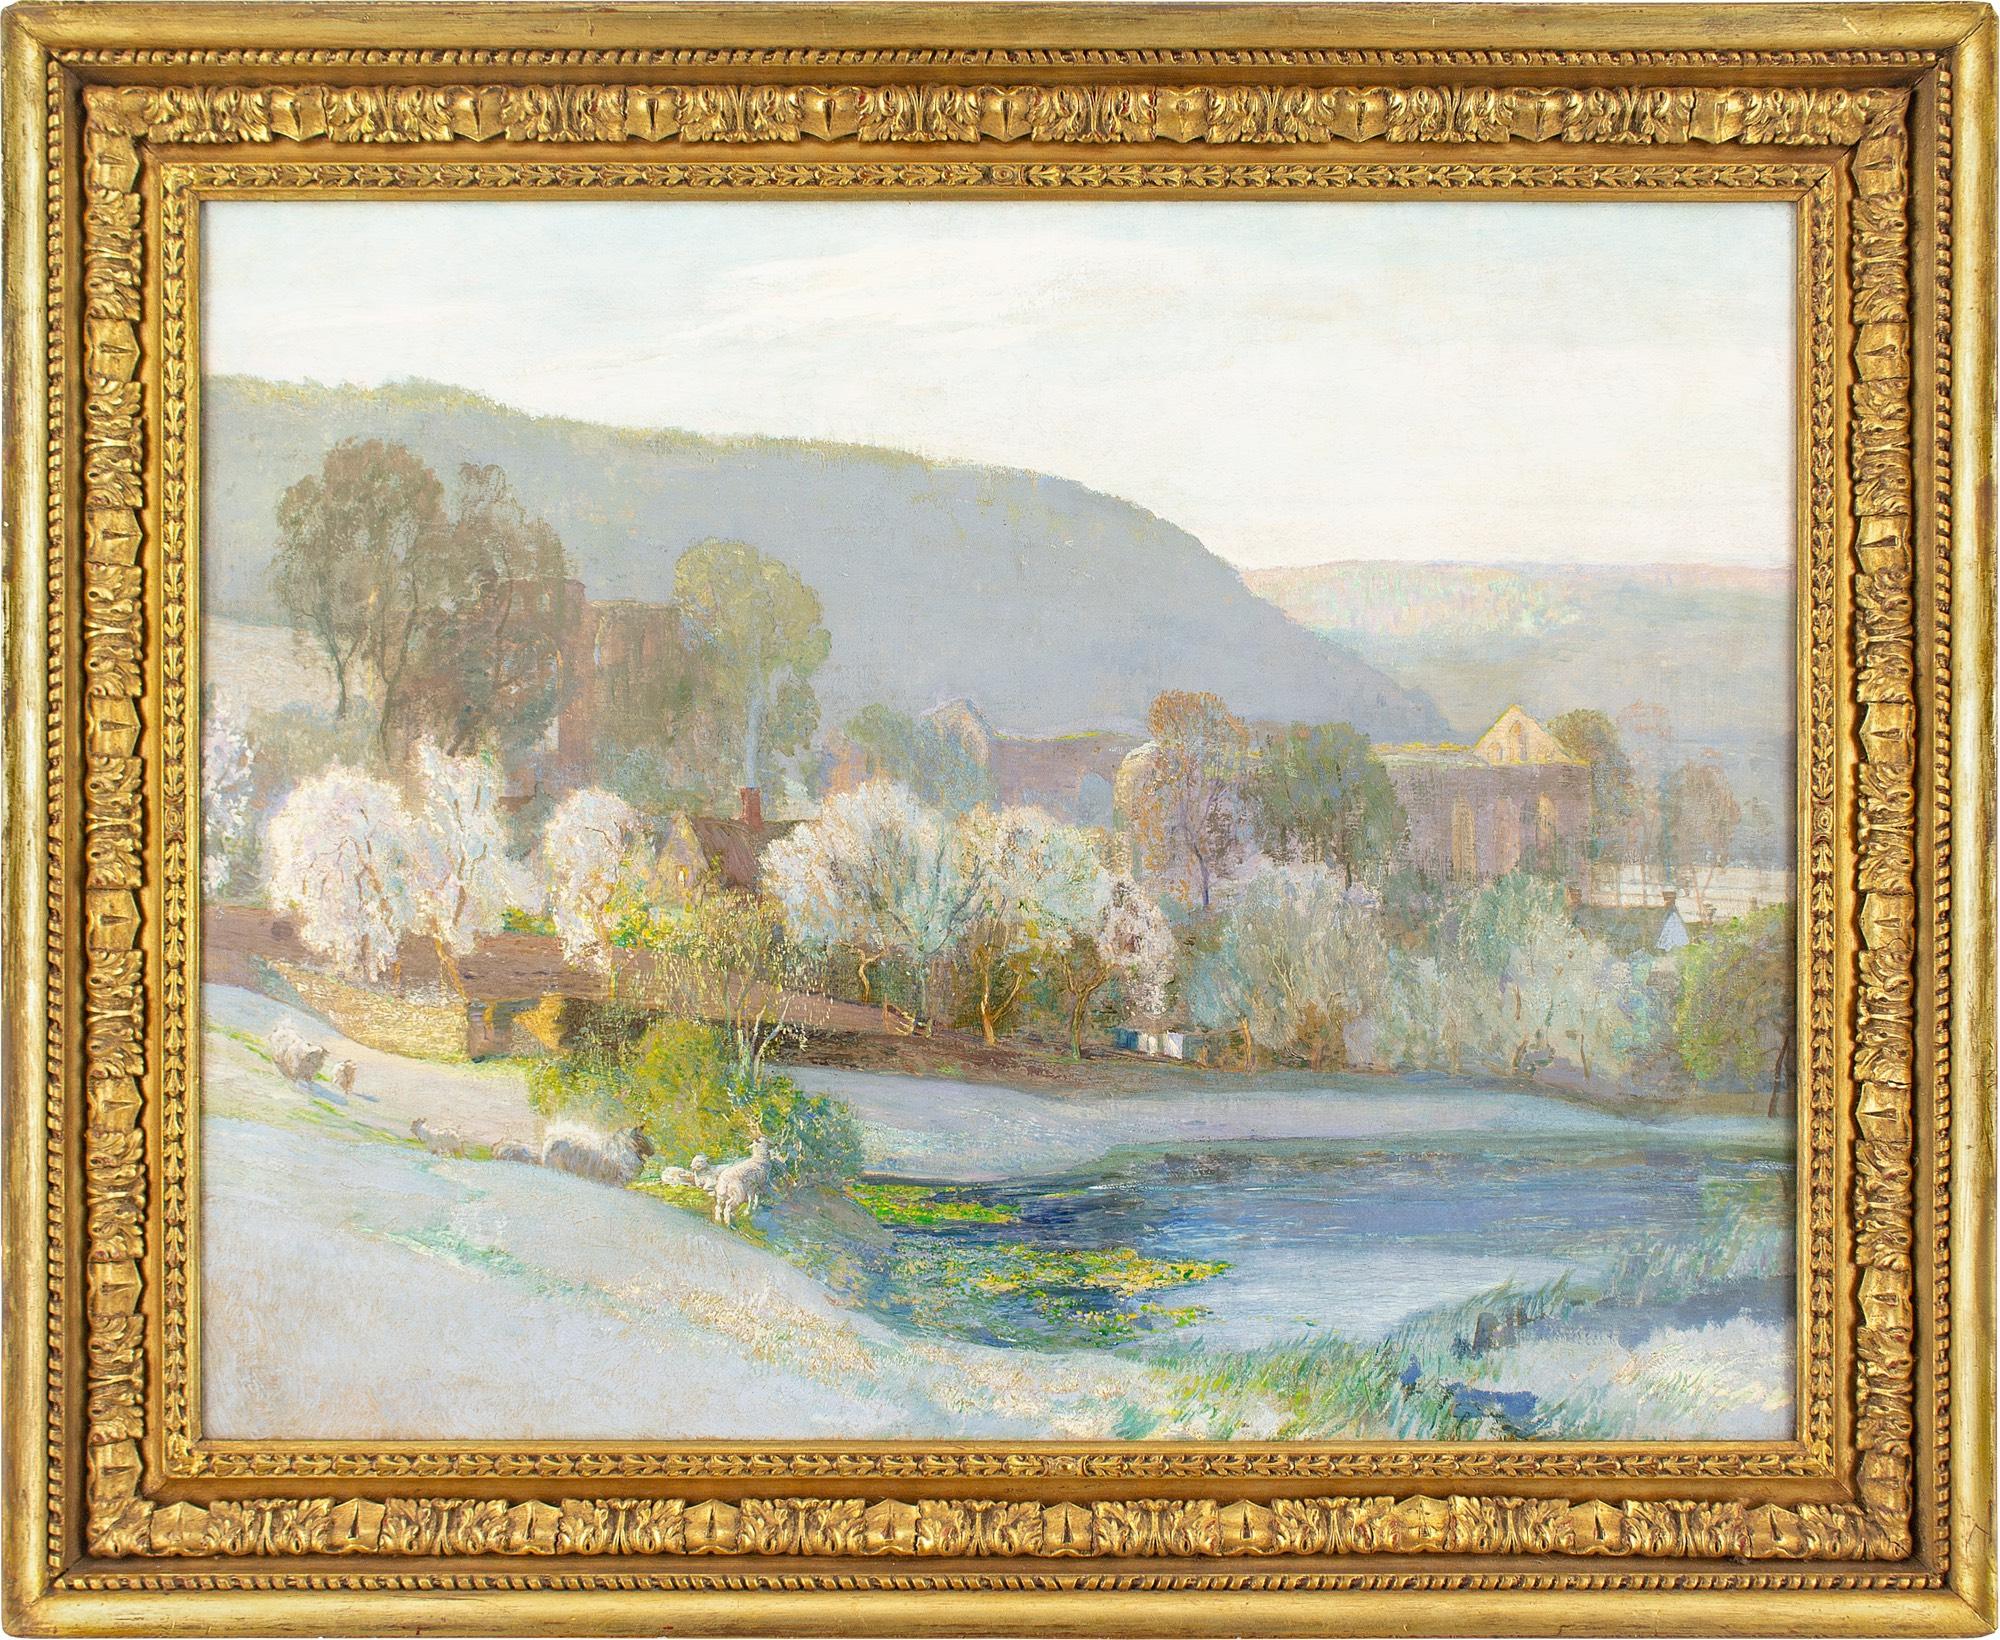 This early 20th-century oil painting by British artist Joseph Walter West (1860-1933) depicts a view of Rievaulx Abbey.

It’s a bitterly cold morning in North Yorkshire as the mediaeval ruins of Rievaulx Abbey peer from beyond hawthorn trees. It’s